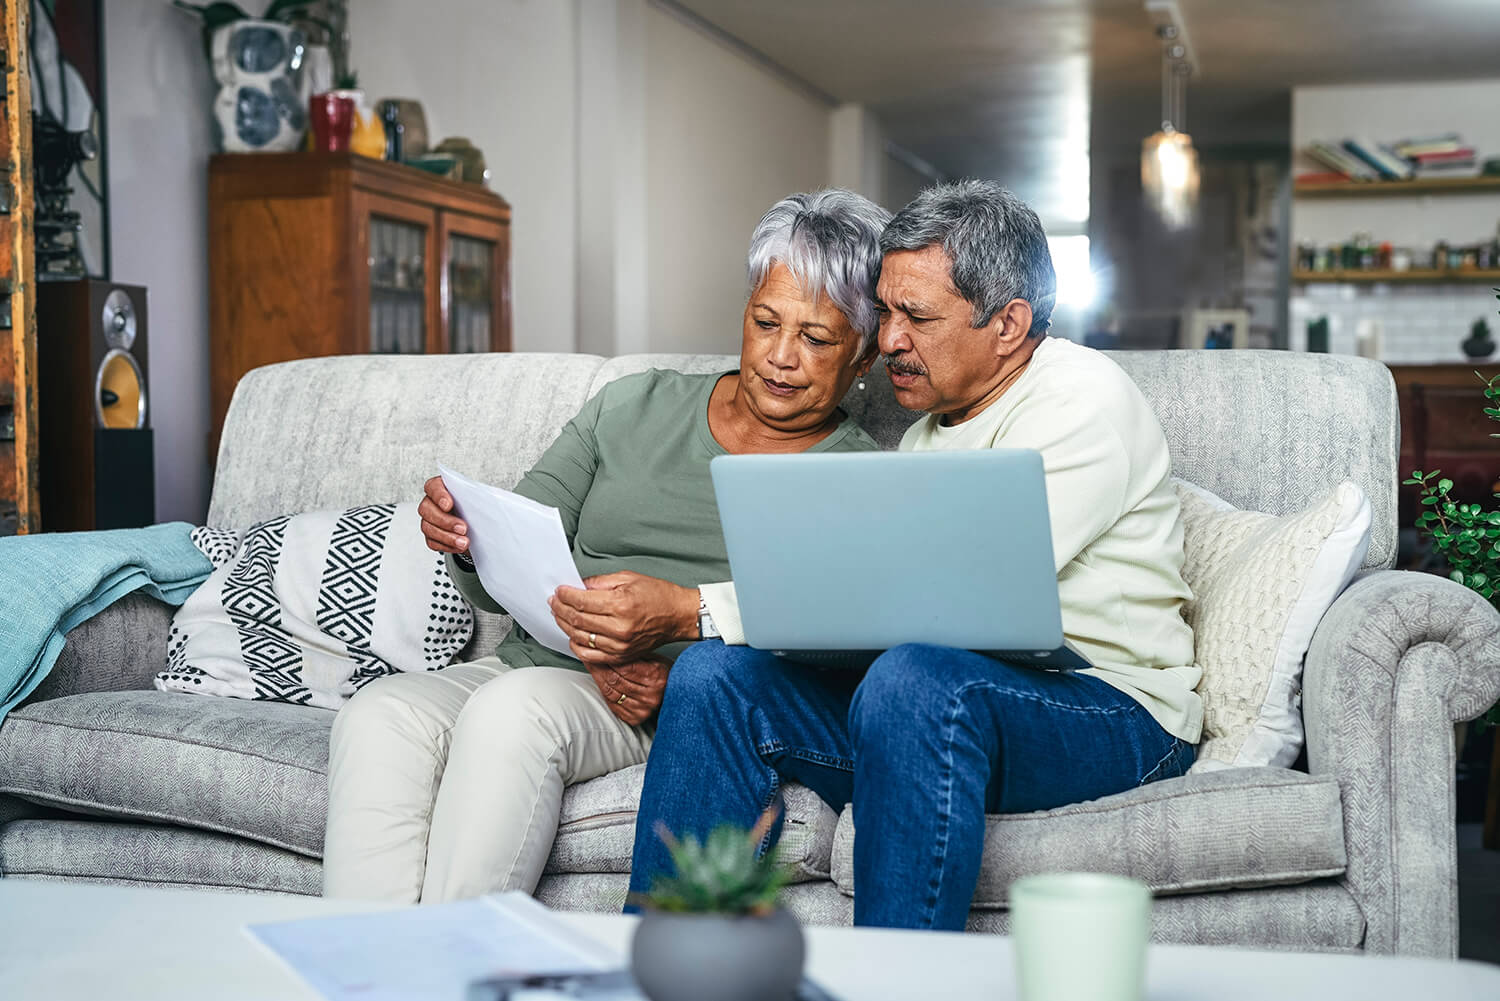 A man and woman sit on a couch going over paperwork with a laptop open. Applying for Social Security Disability benefits requires gathering a lot of information.